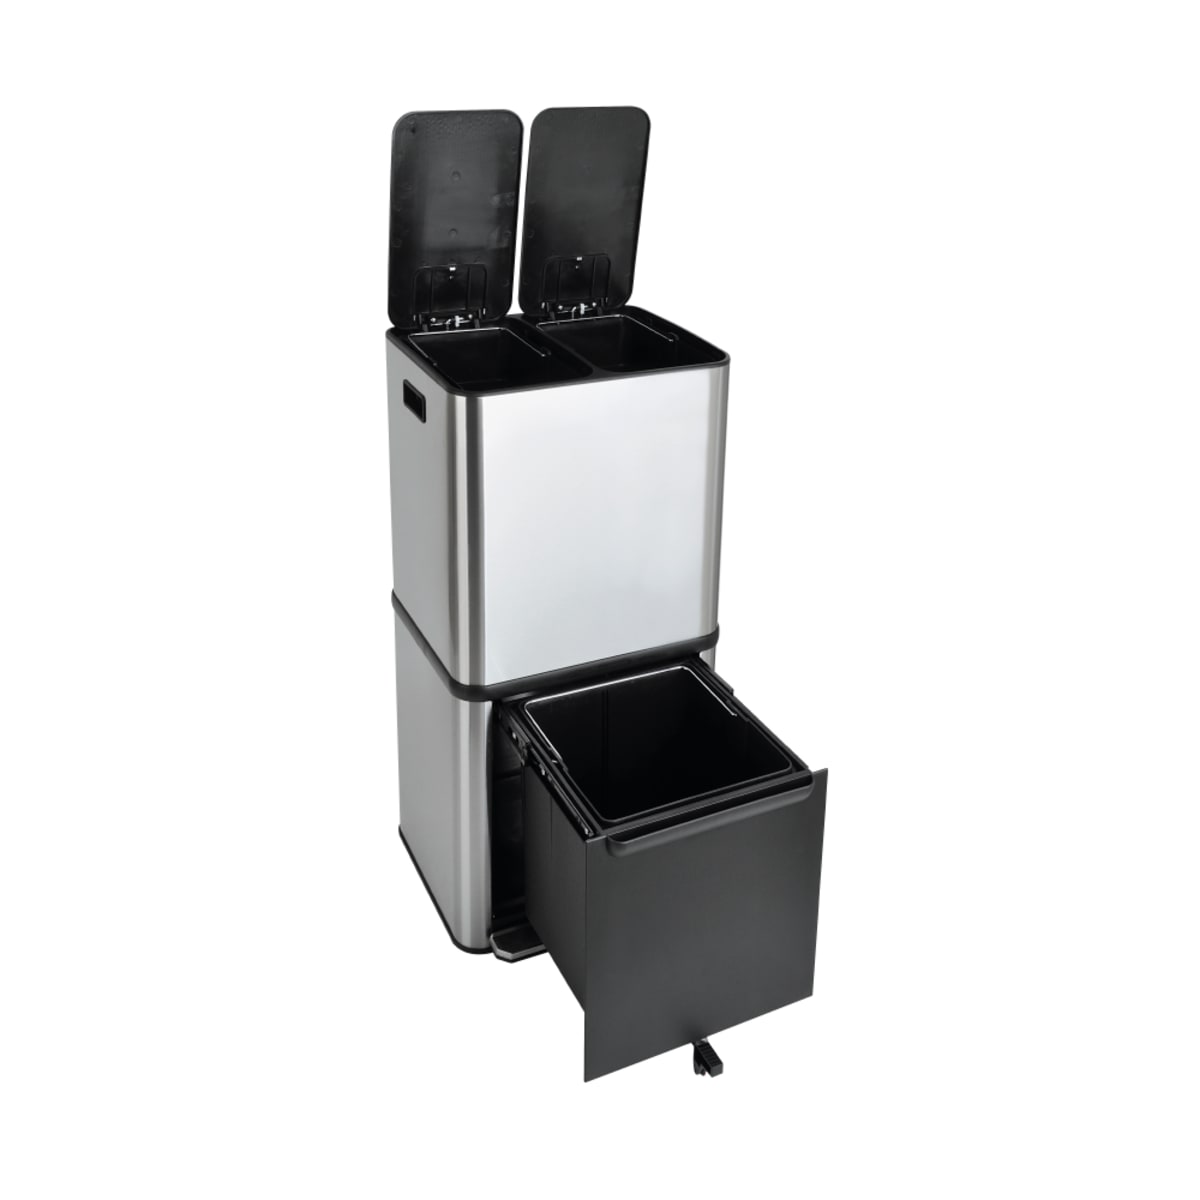 PEDAL BIN 2X15L AND SINGLE CONTAINER 20L, STAINLESS STEEL, SOFT CLOSING